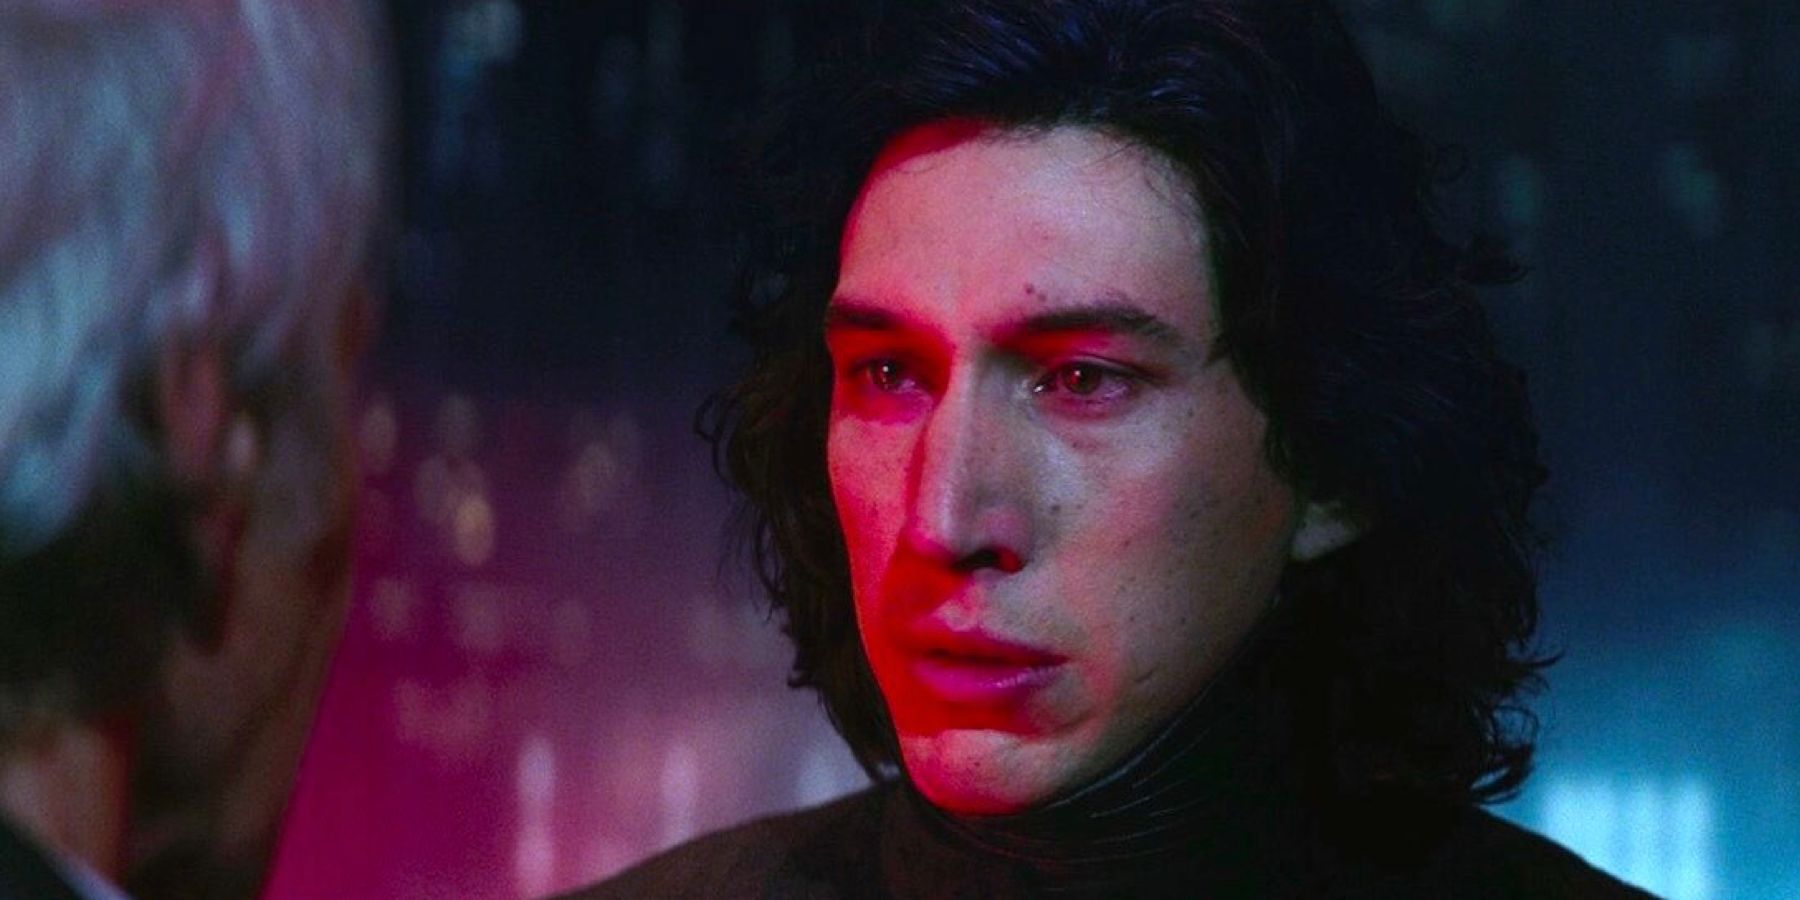 Kylo Ren conflicted, looks to his father for help in Star Wars: Episode VII - The Force Awakens.